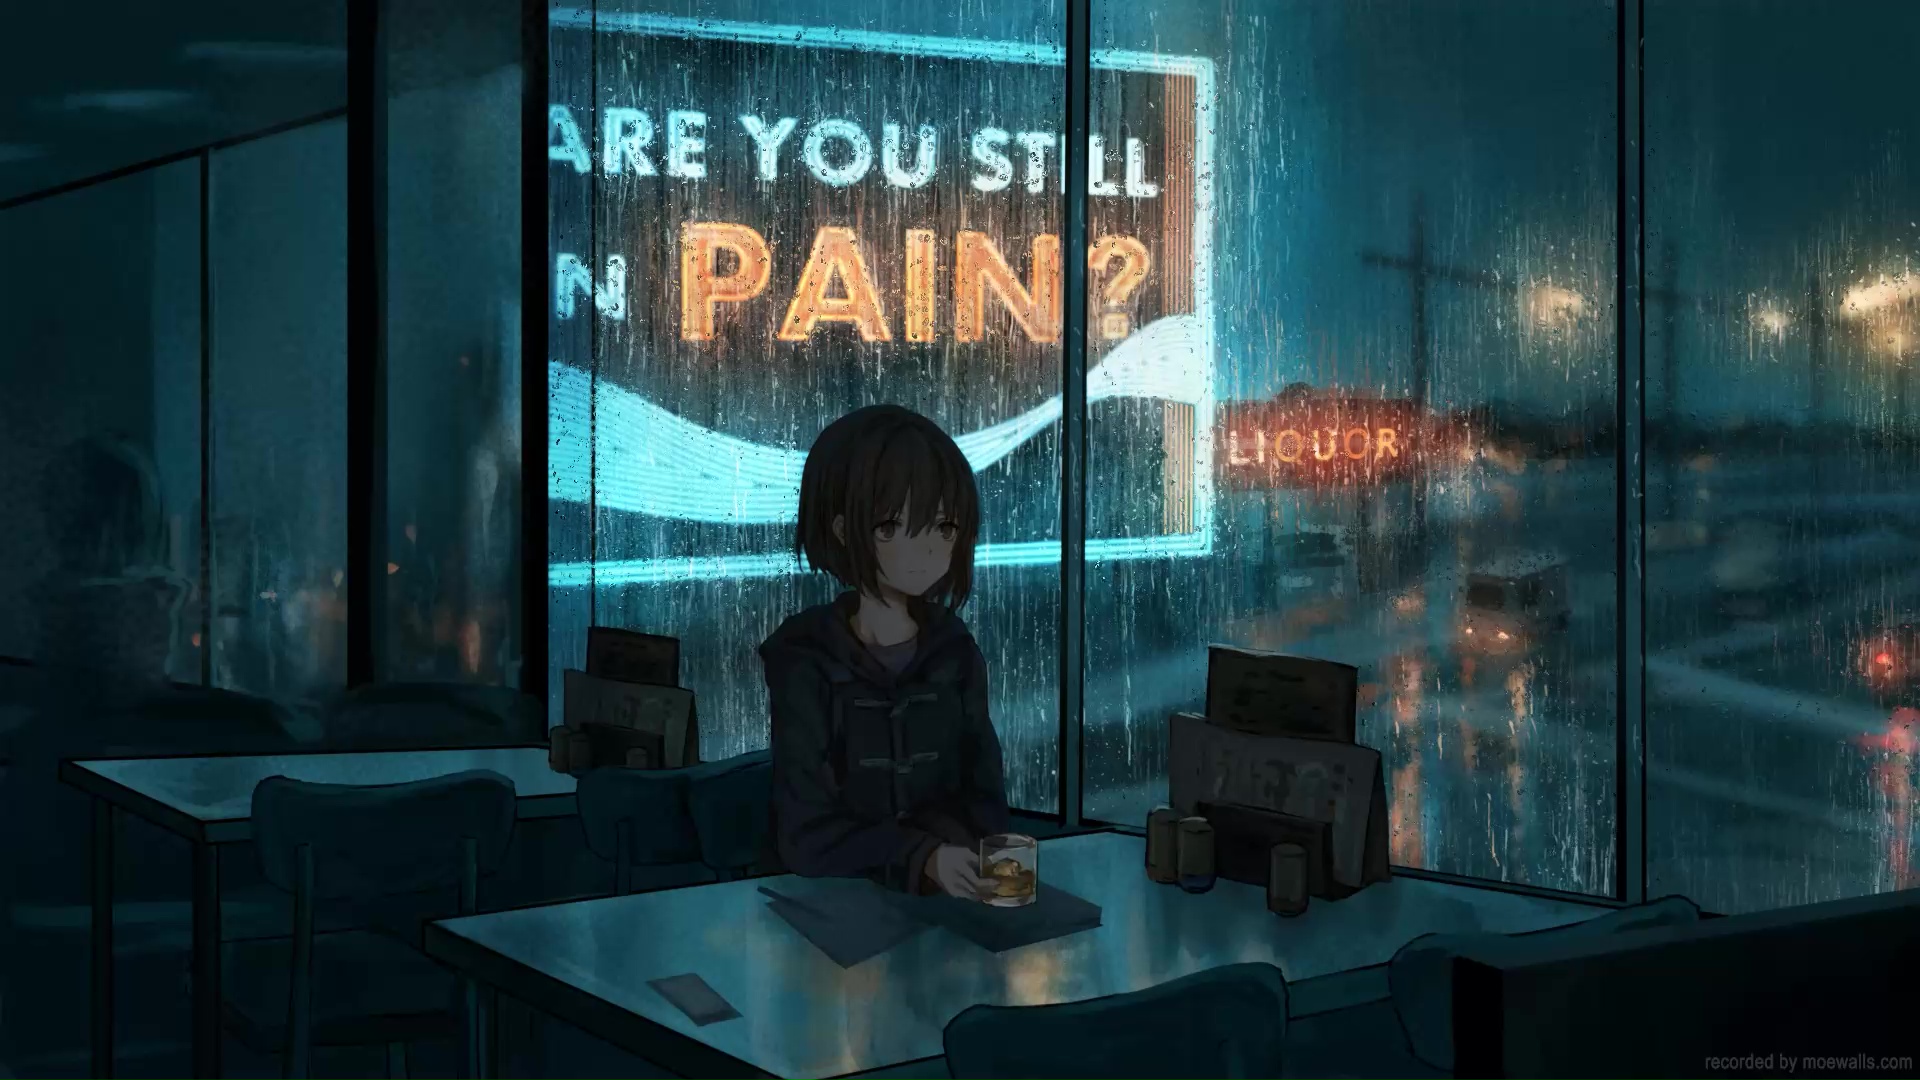 Girl In The Rainy Evening Live Wallpaper